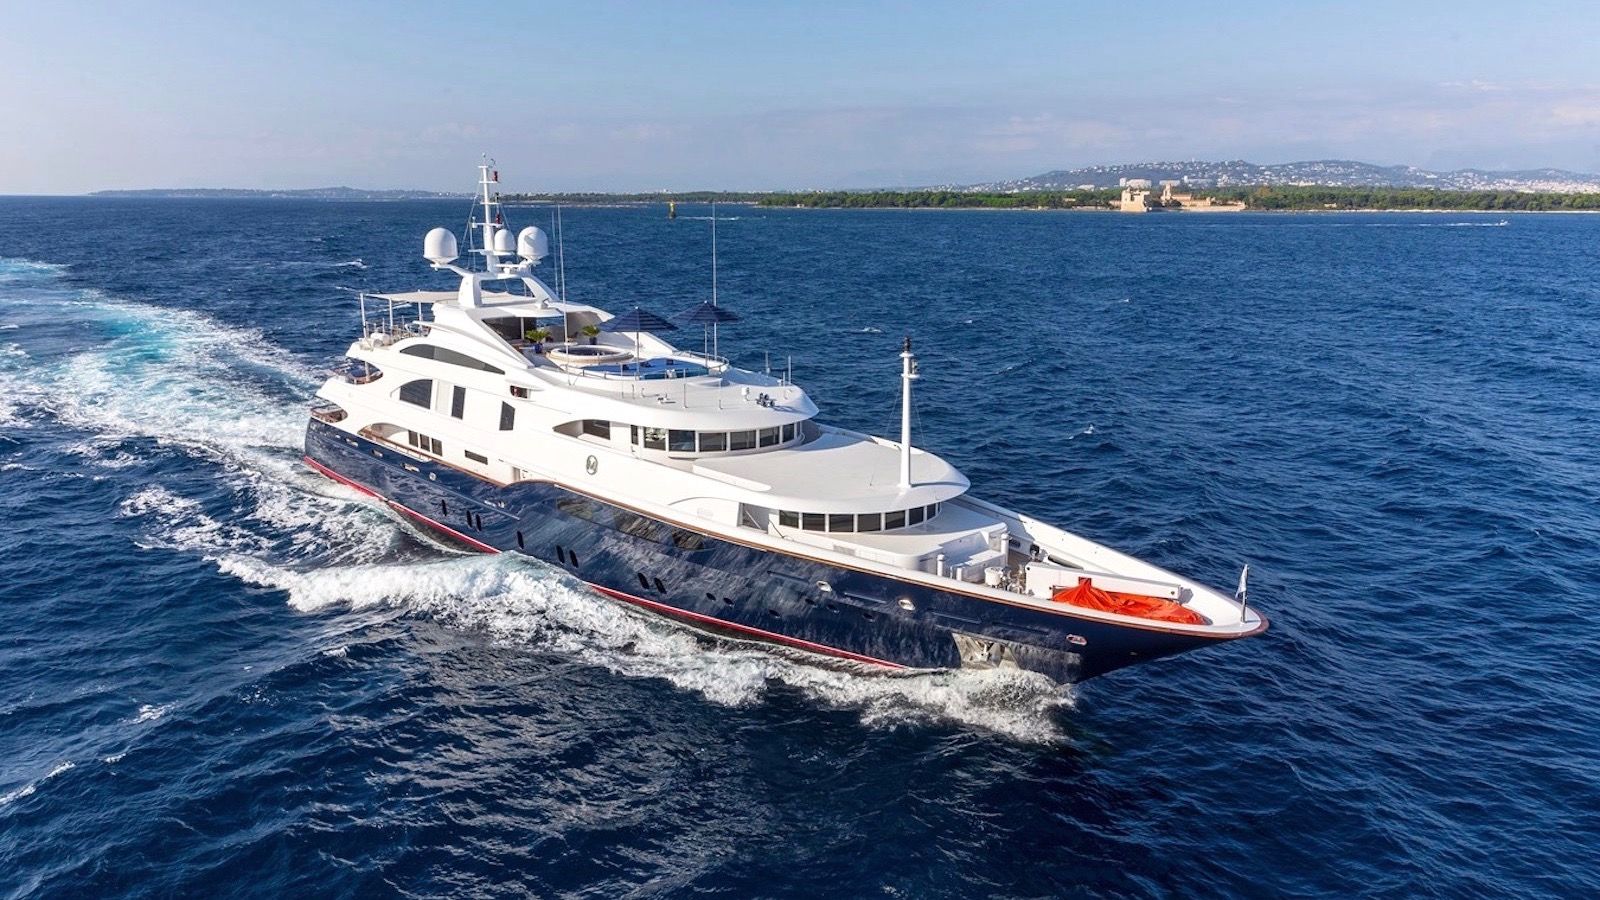 50m to 60m Luxury Yachts for Sale (164ft to 196ft Yachts) - IYC